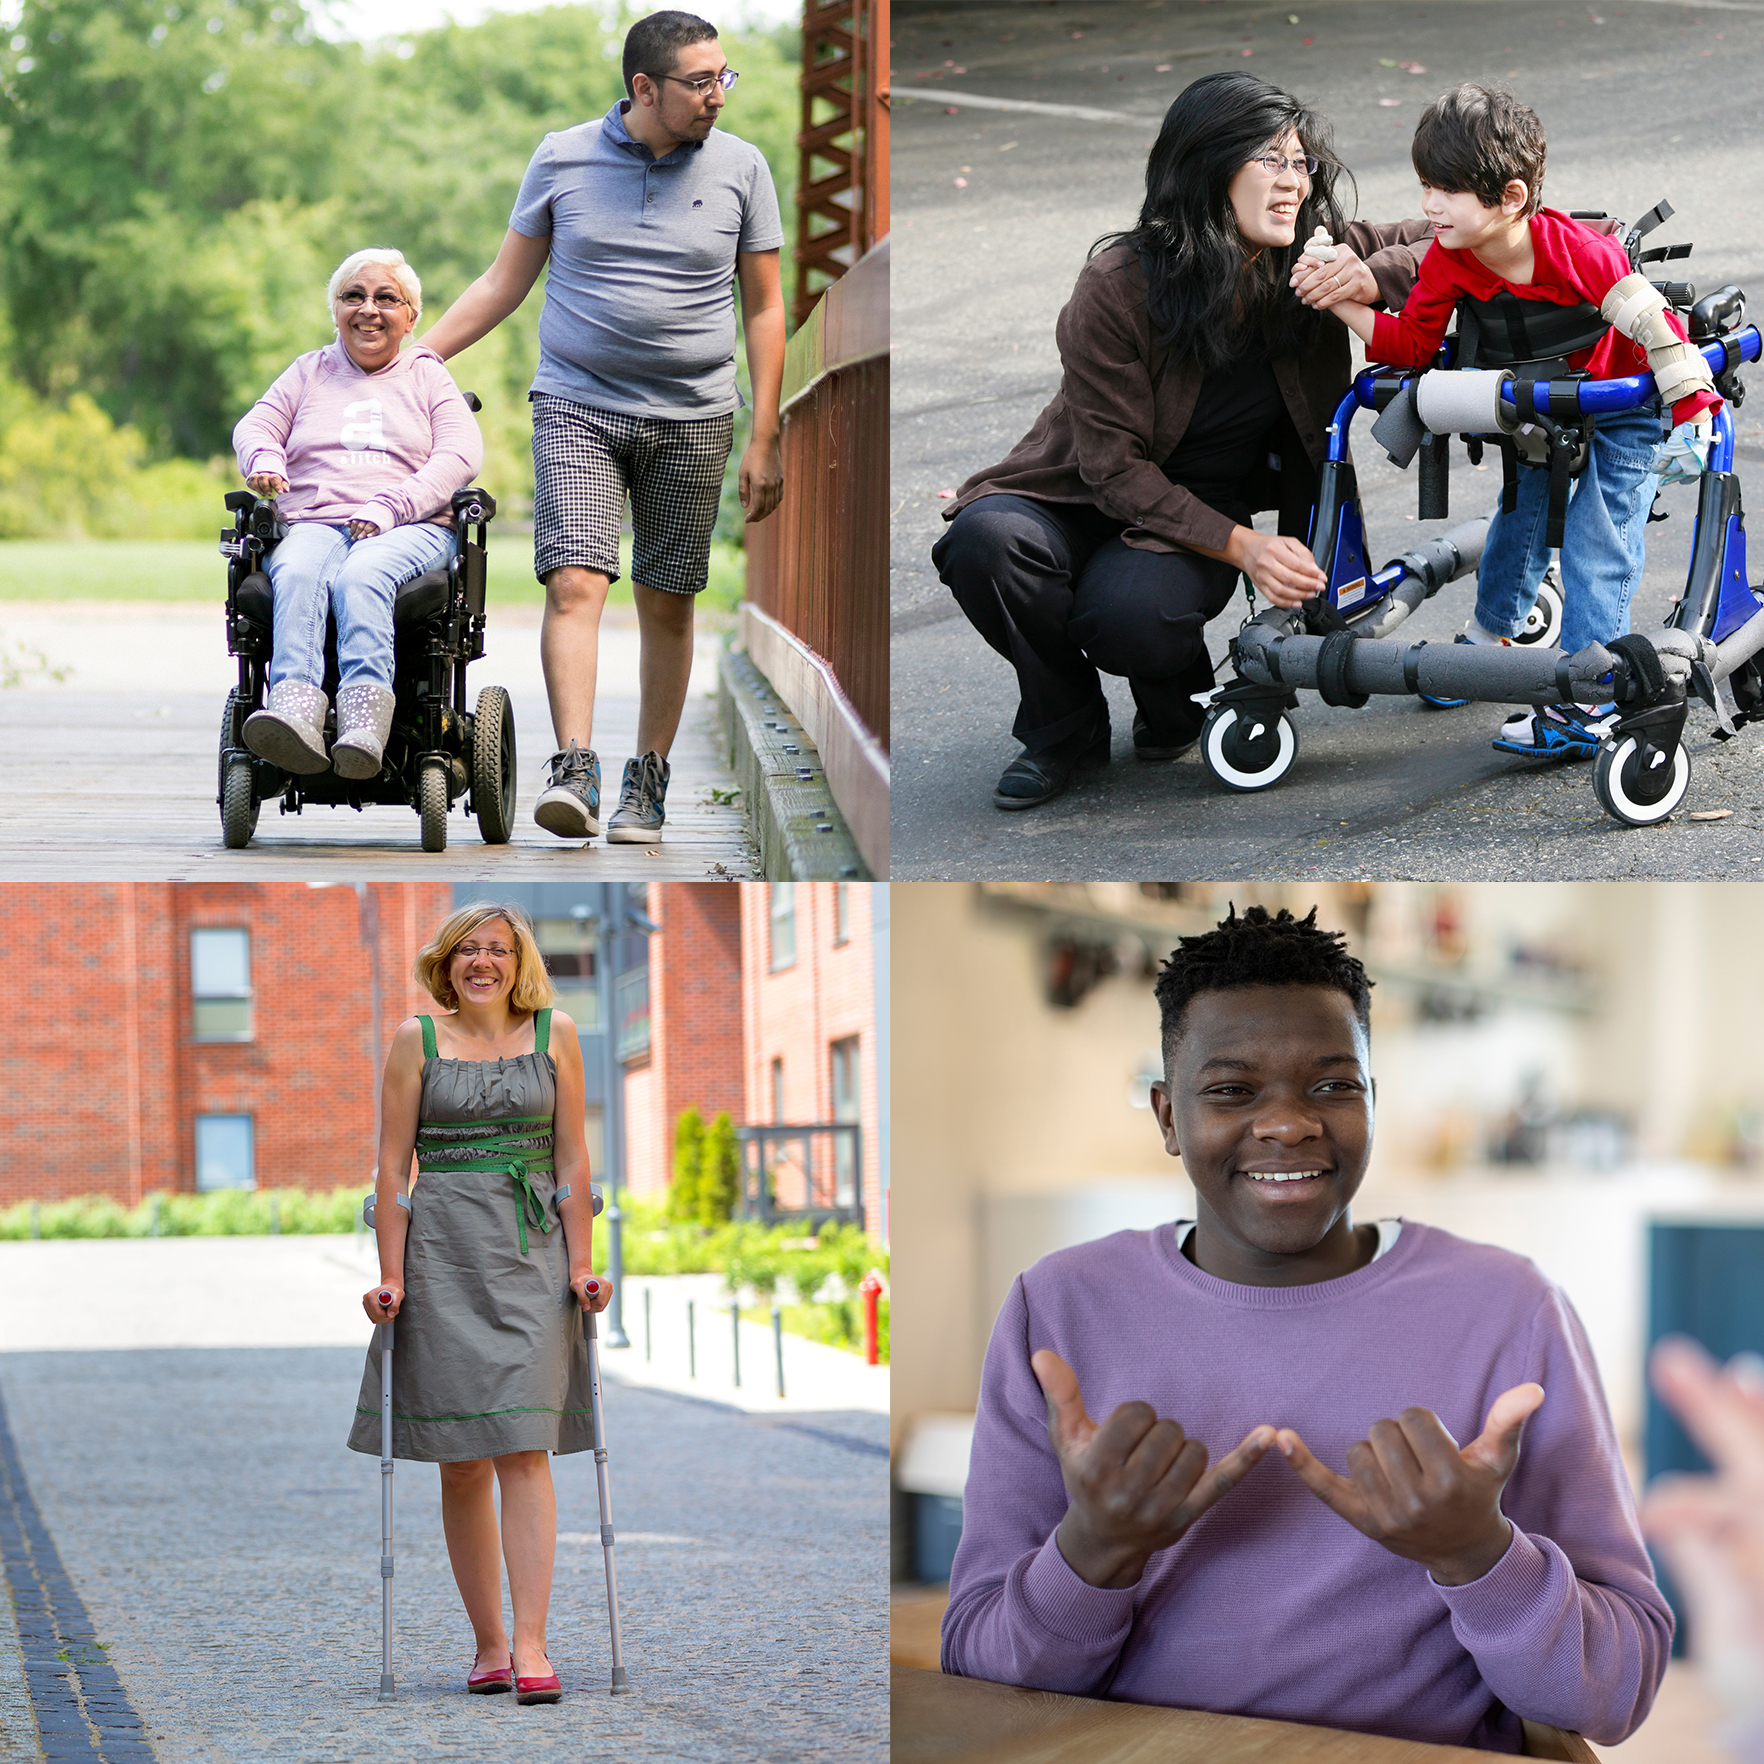 Collage of 4 images representing diverse disabilities